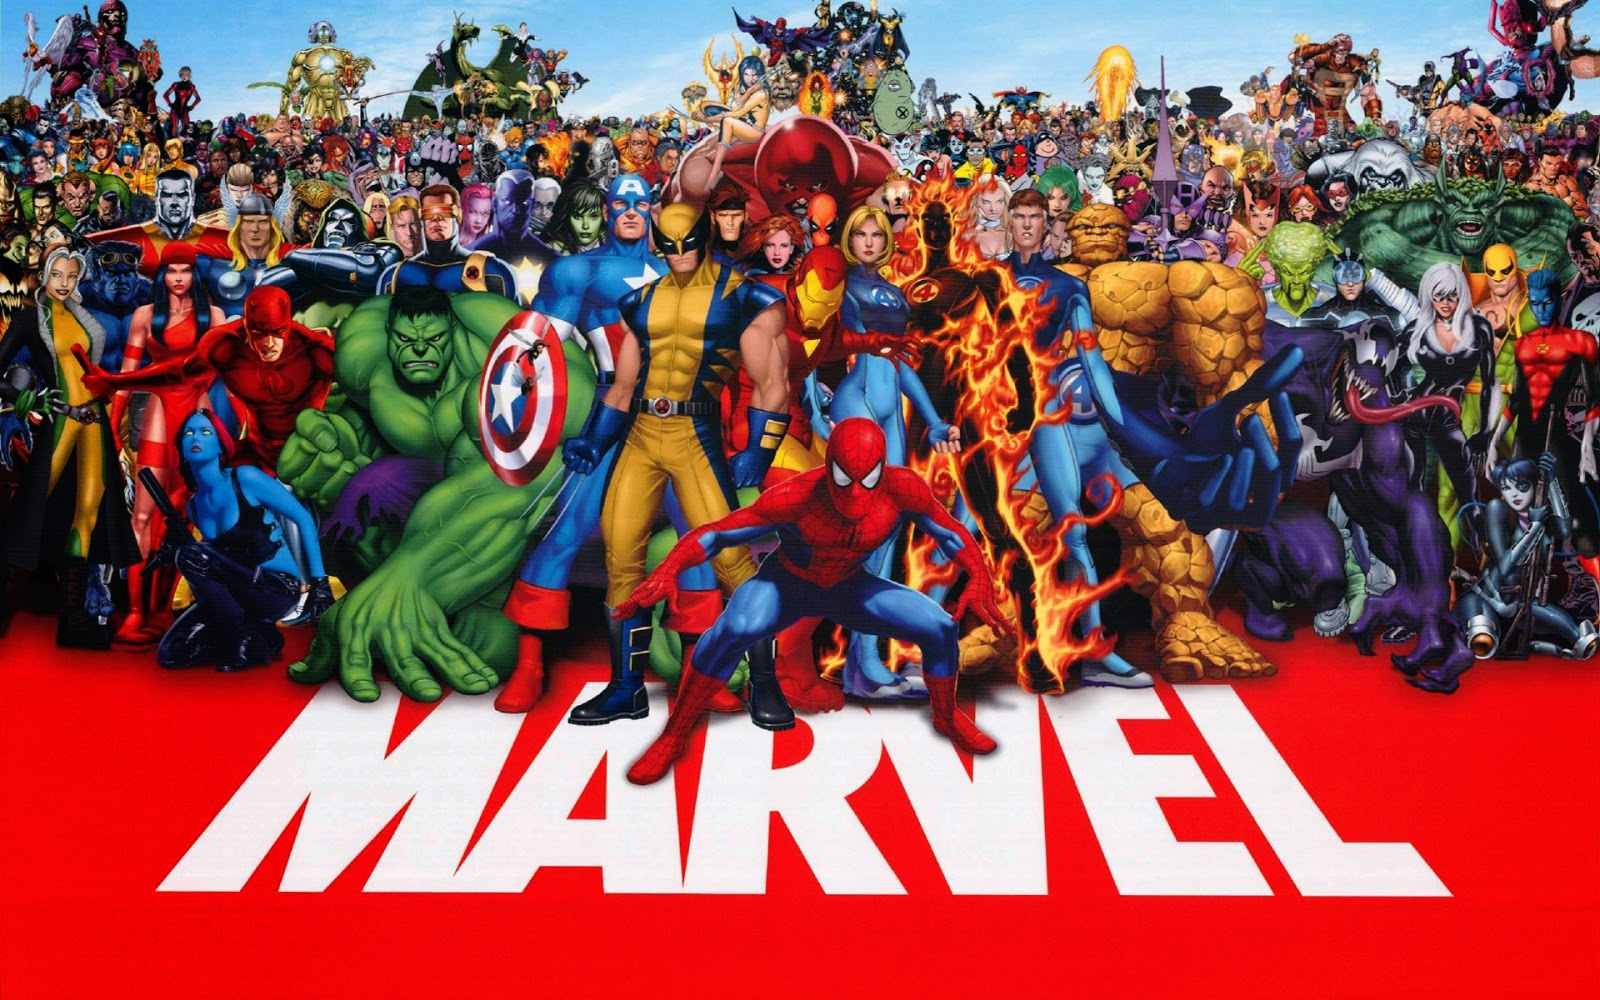 The Marvel Heroes in Disguise! (Marvel Fan Club)